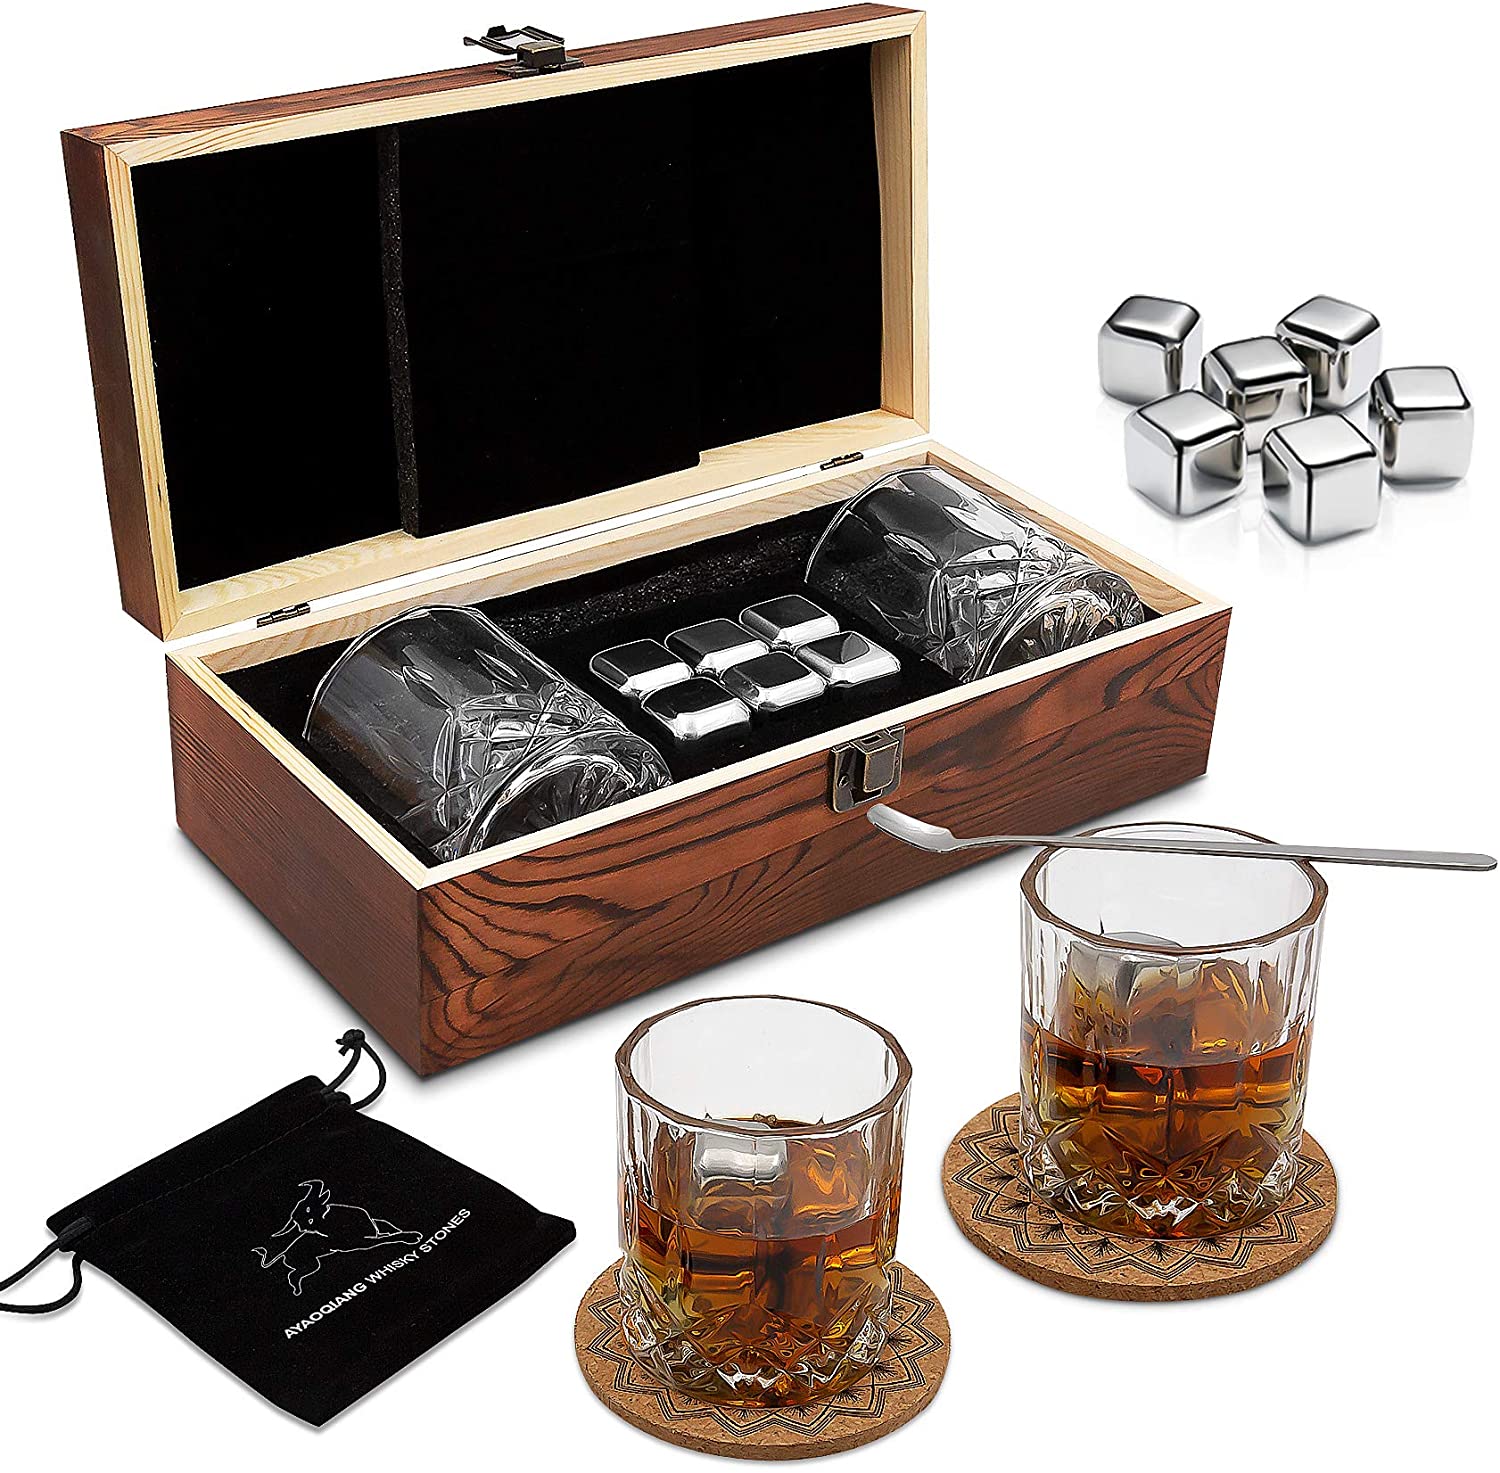 Professional Design Cordierite Pizza Stone - Thickness base Whiskey Glass Set stainless steel whiskey stone chilling cube gift in wooden box  – Shunstone